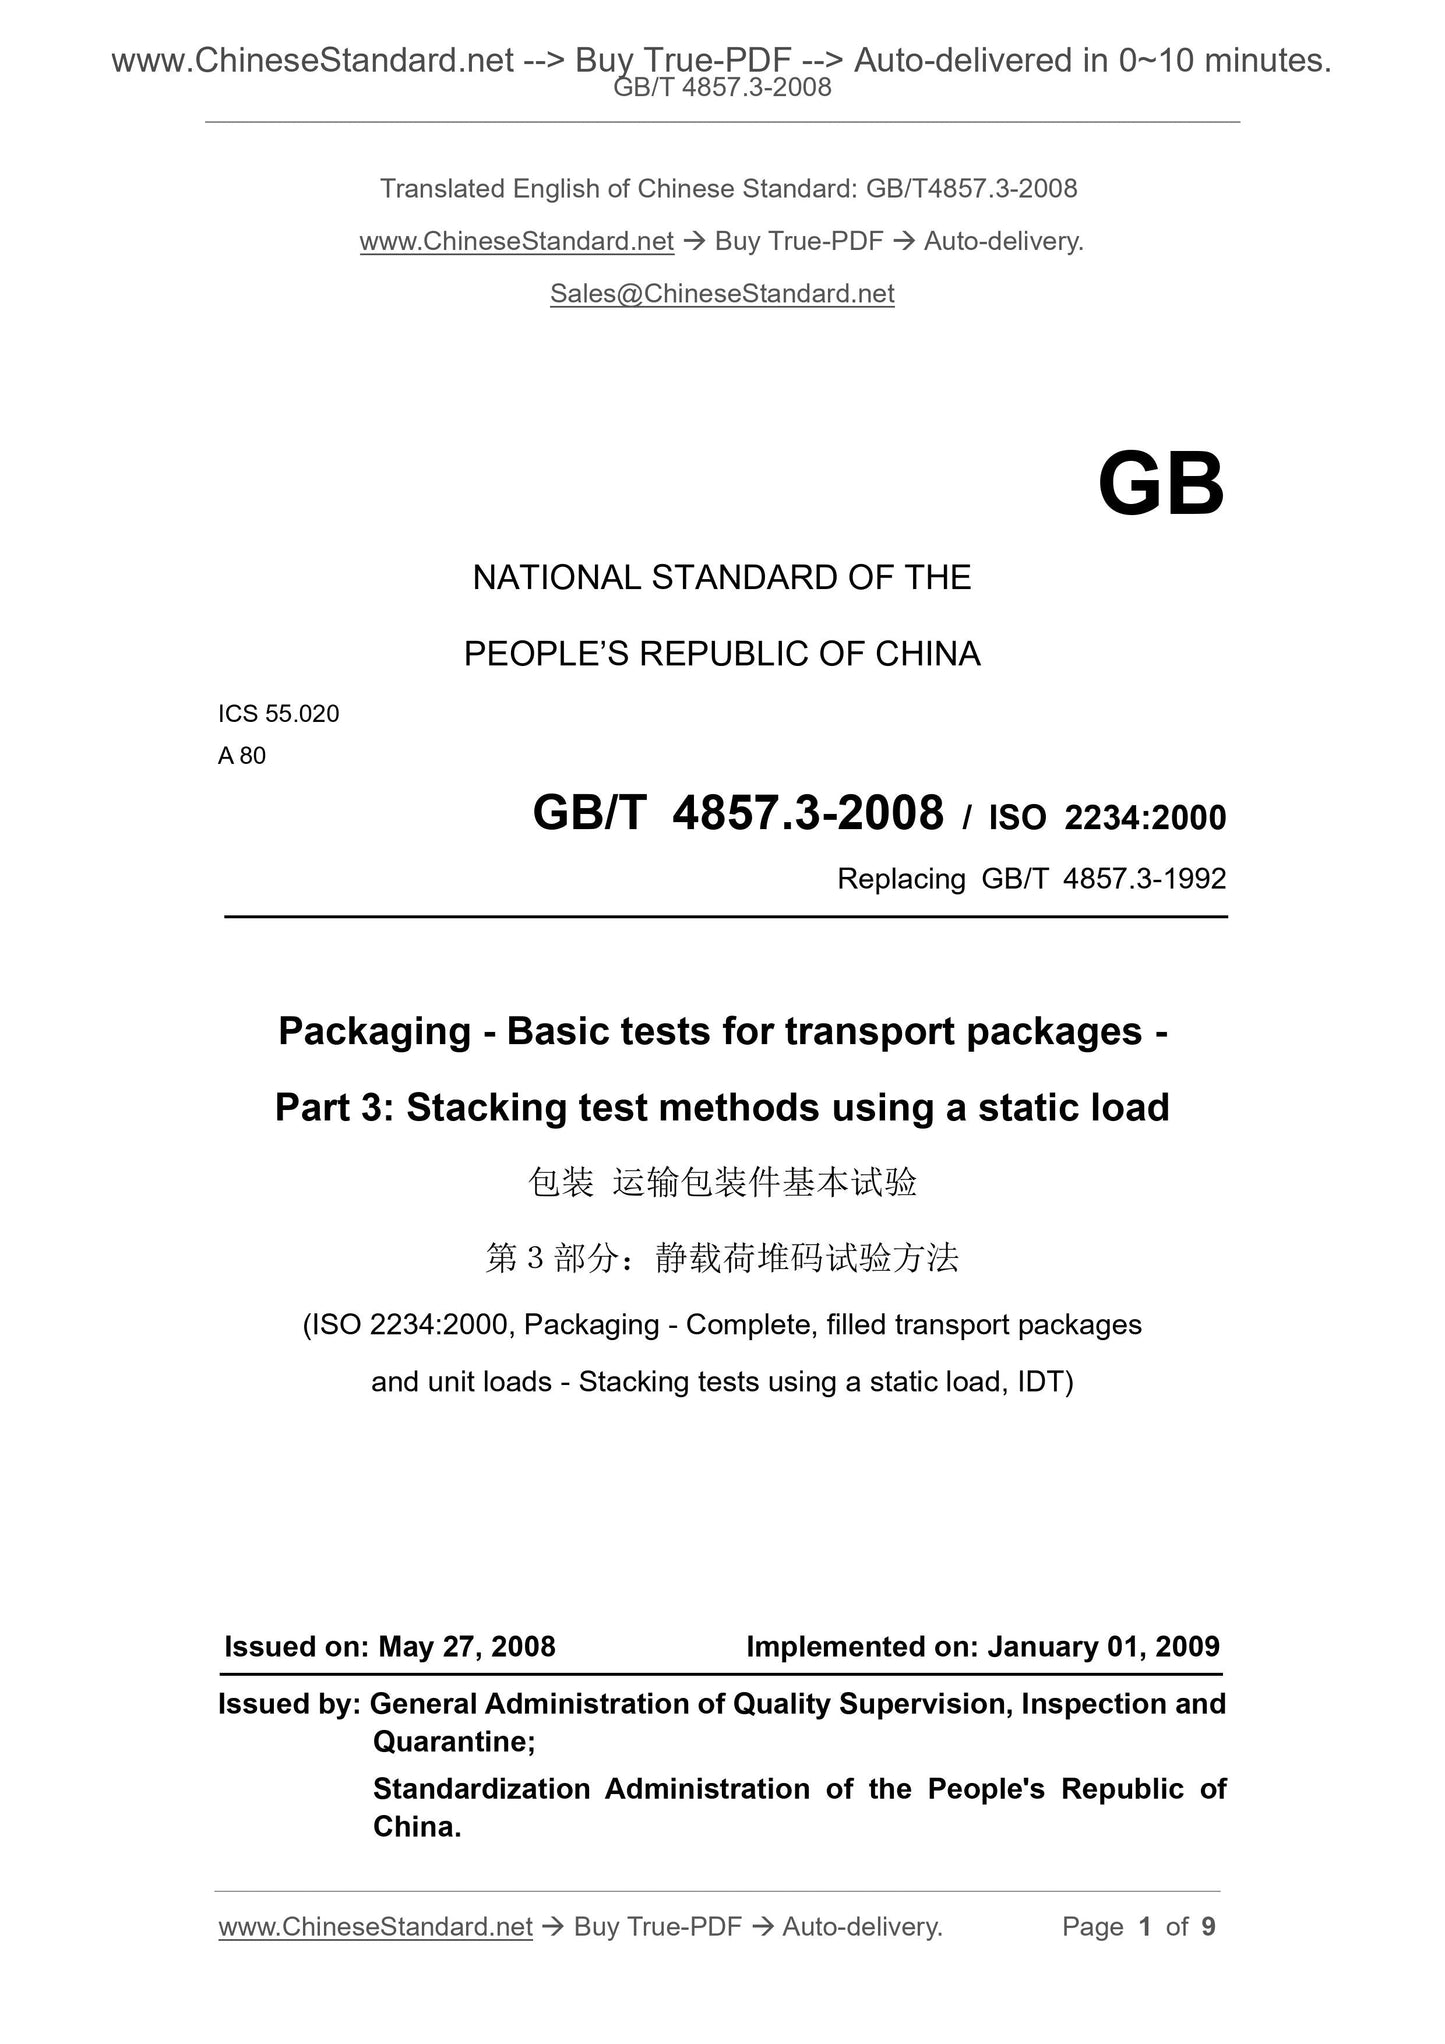 GB/T 4857.3-2008 Page 1